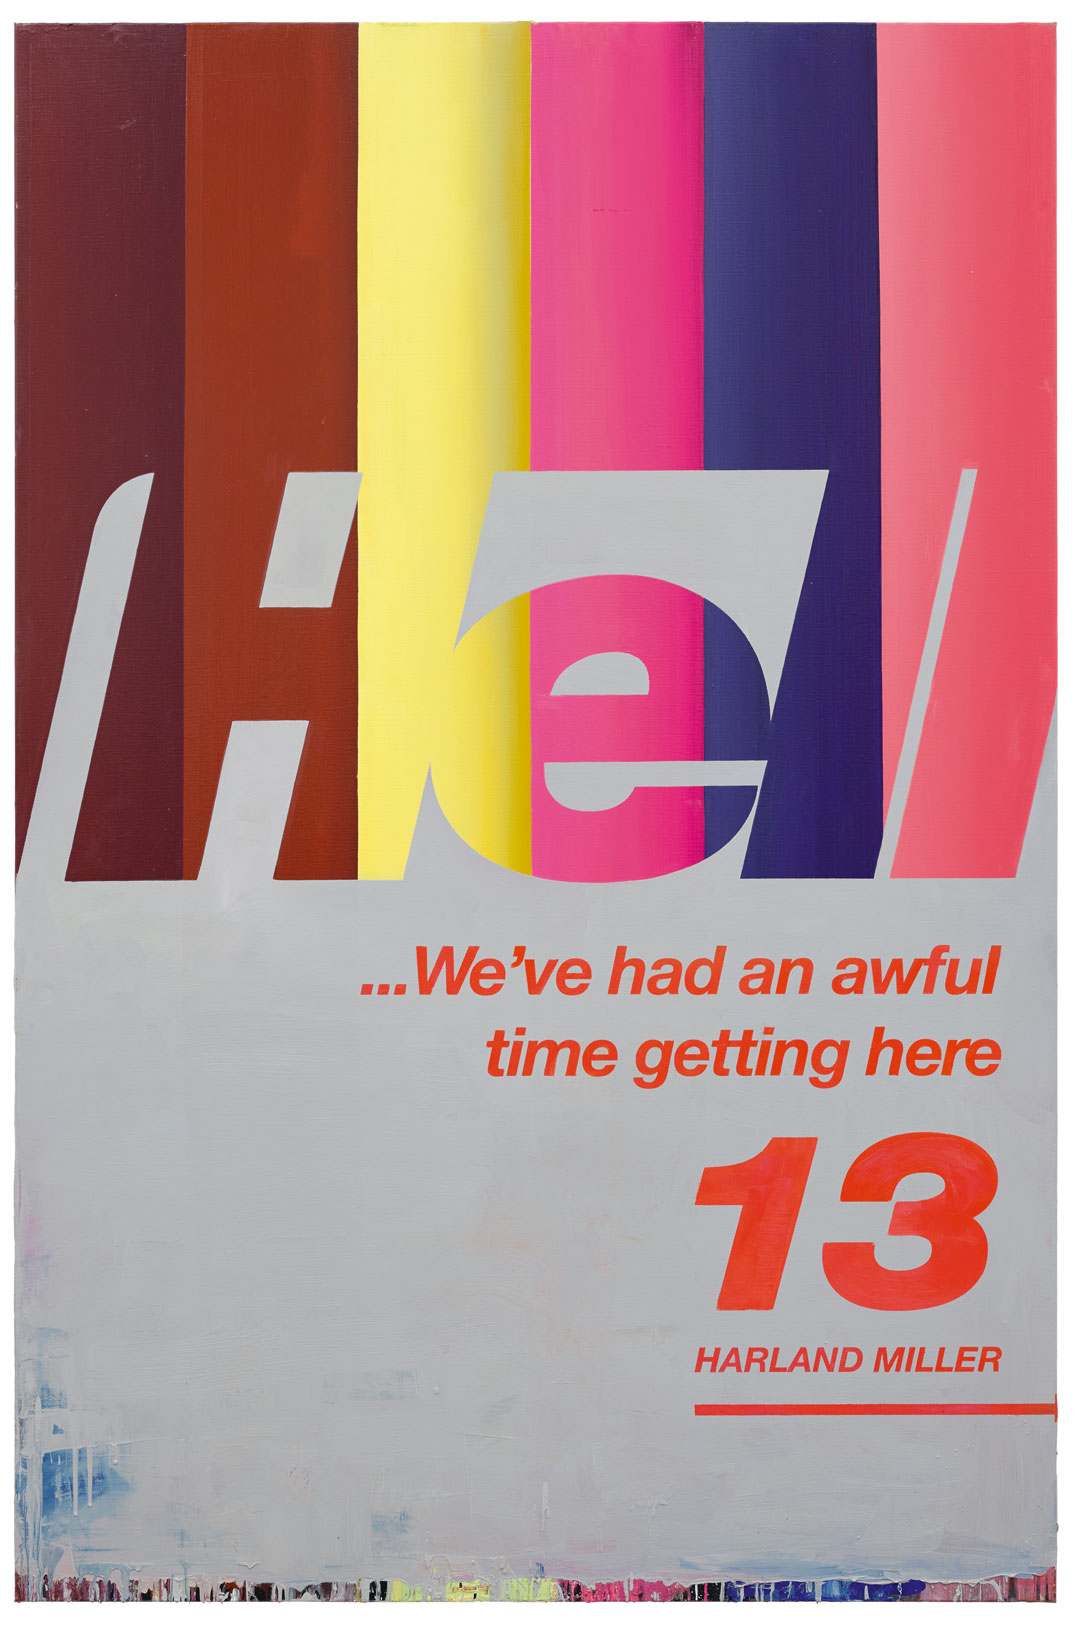 Hell…We’ve Had an Awful Time Getting Here 13 (2017) by Harland Miller